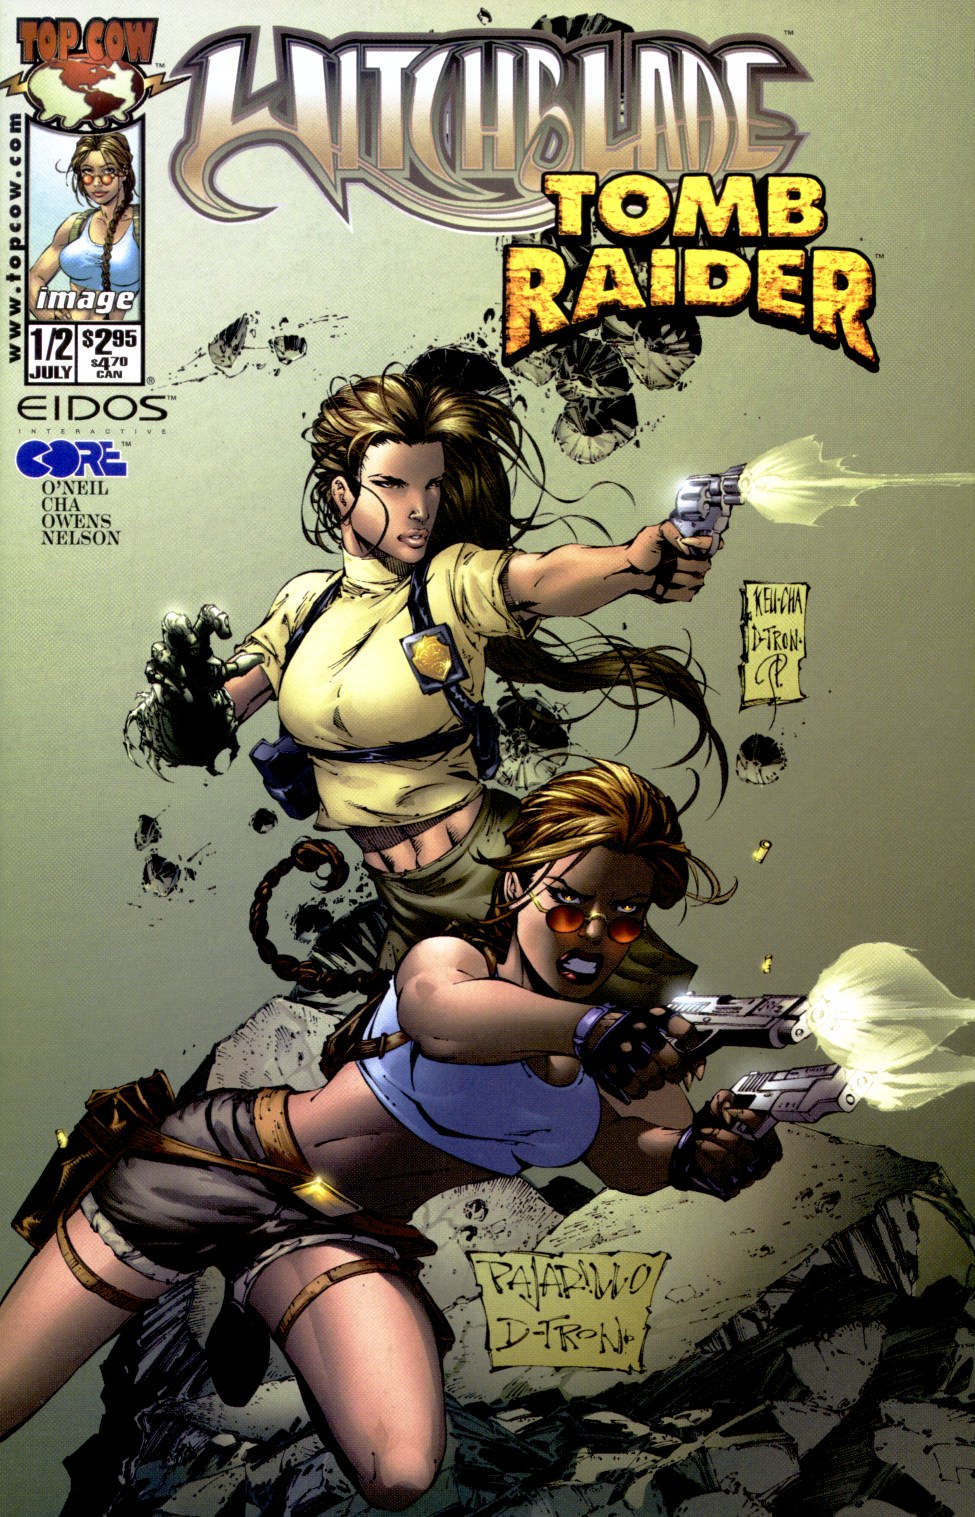 Read online Witchblade/Tomb Raider comic -  Issue #0.5 - 1